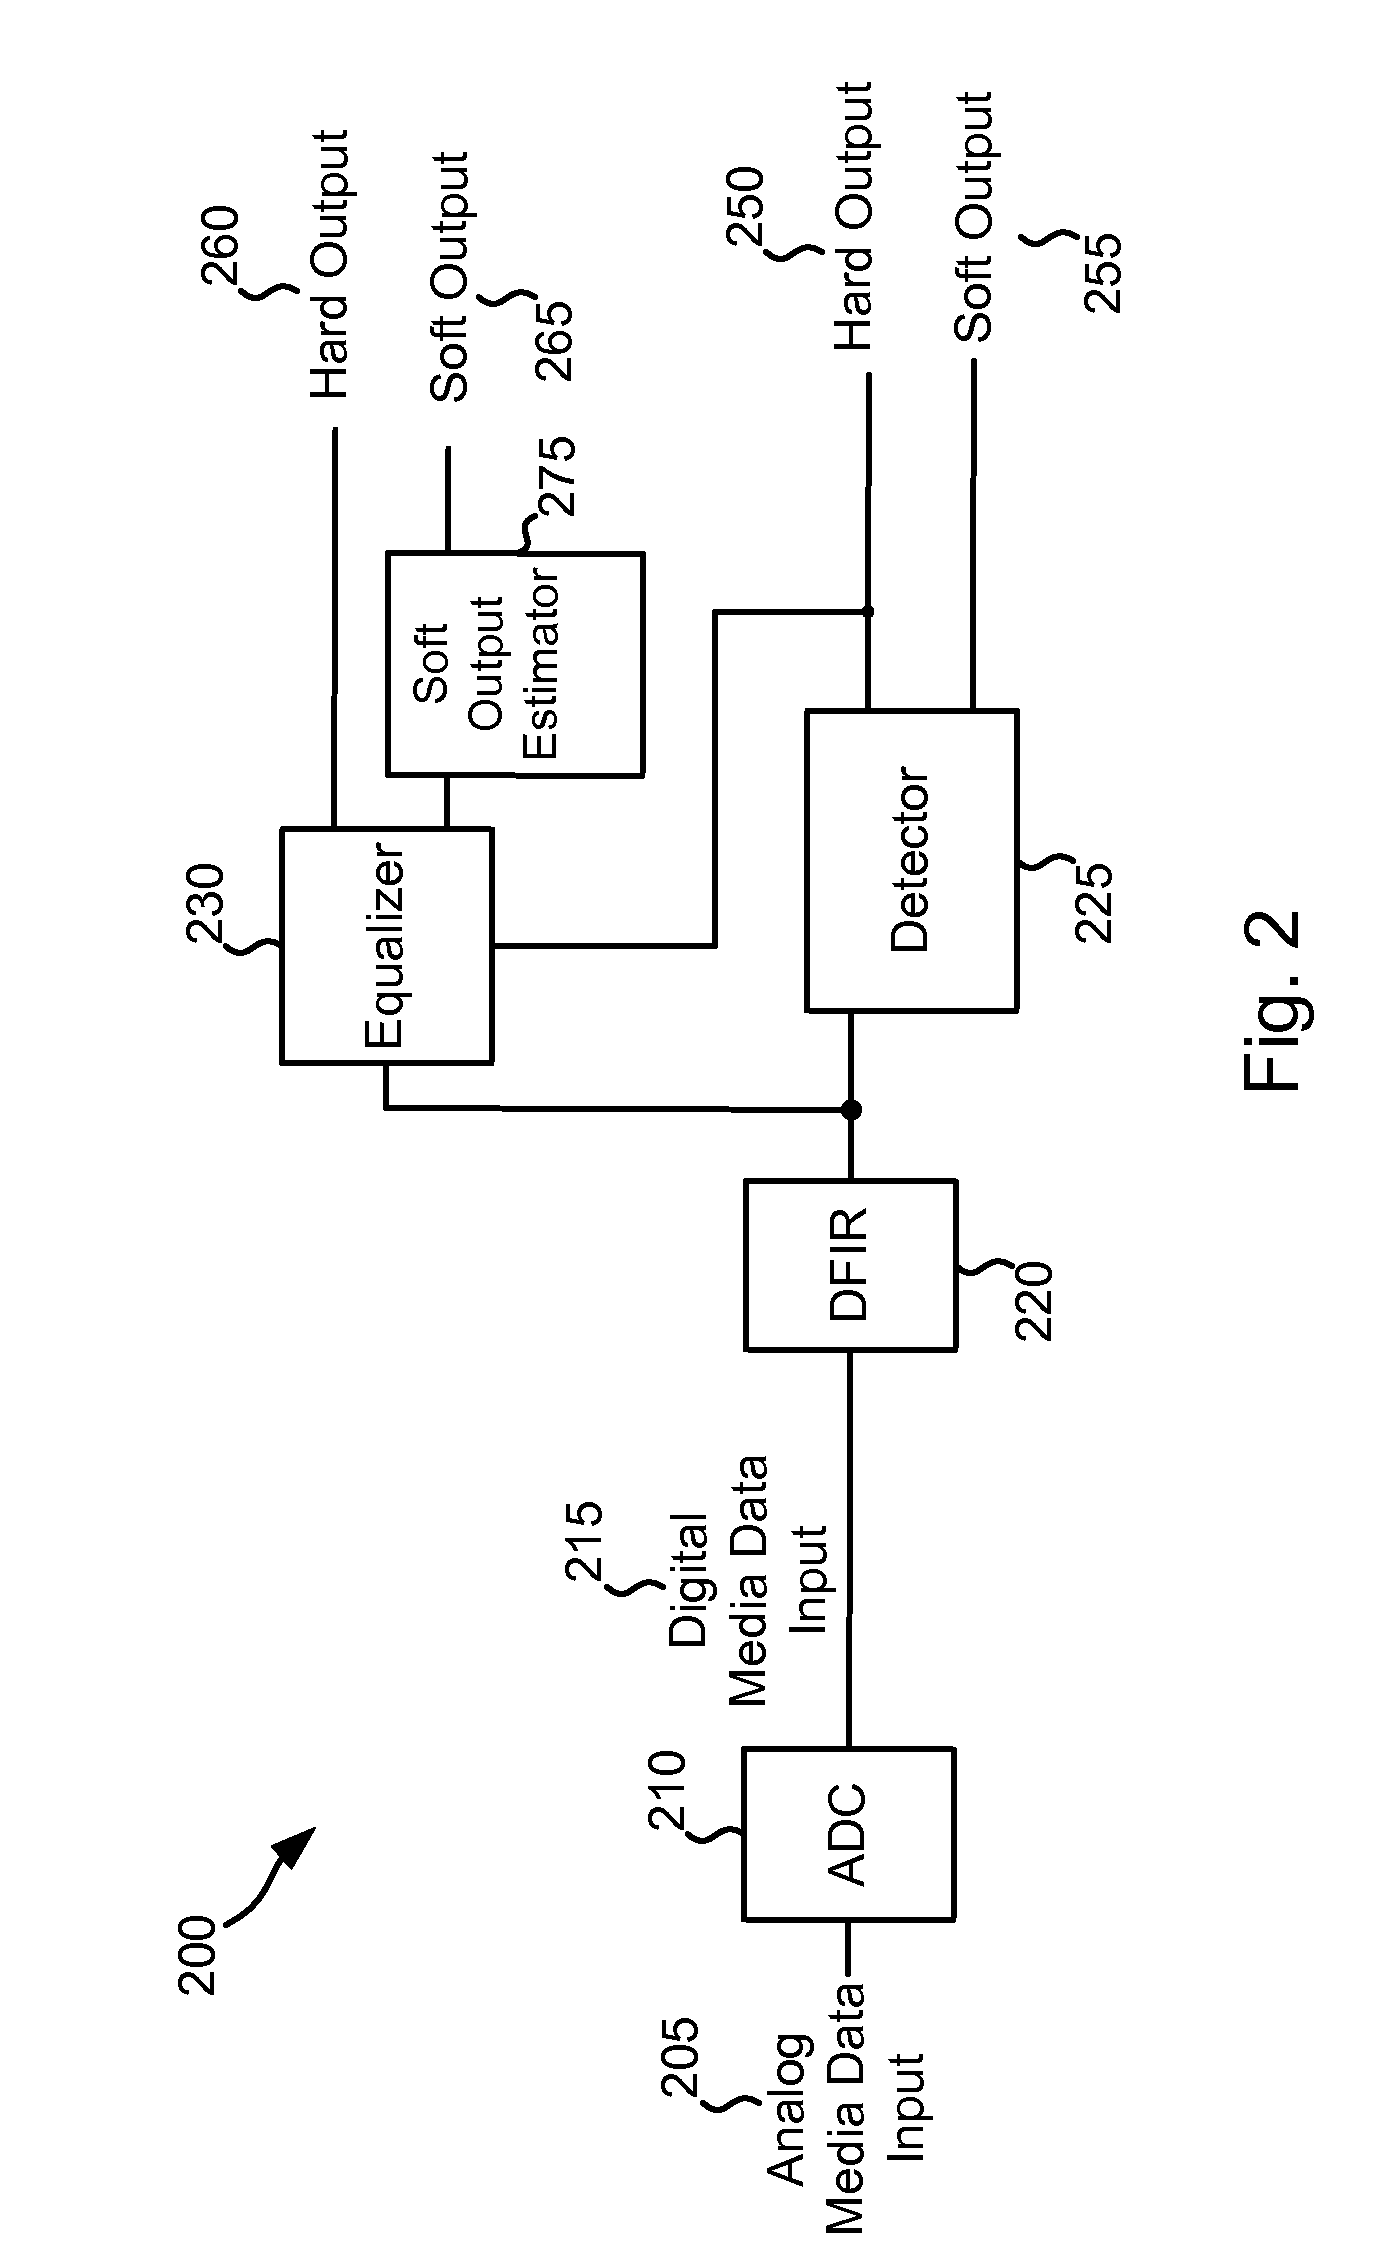 Systems and Methods for Regenerating Data from a Defective Medium